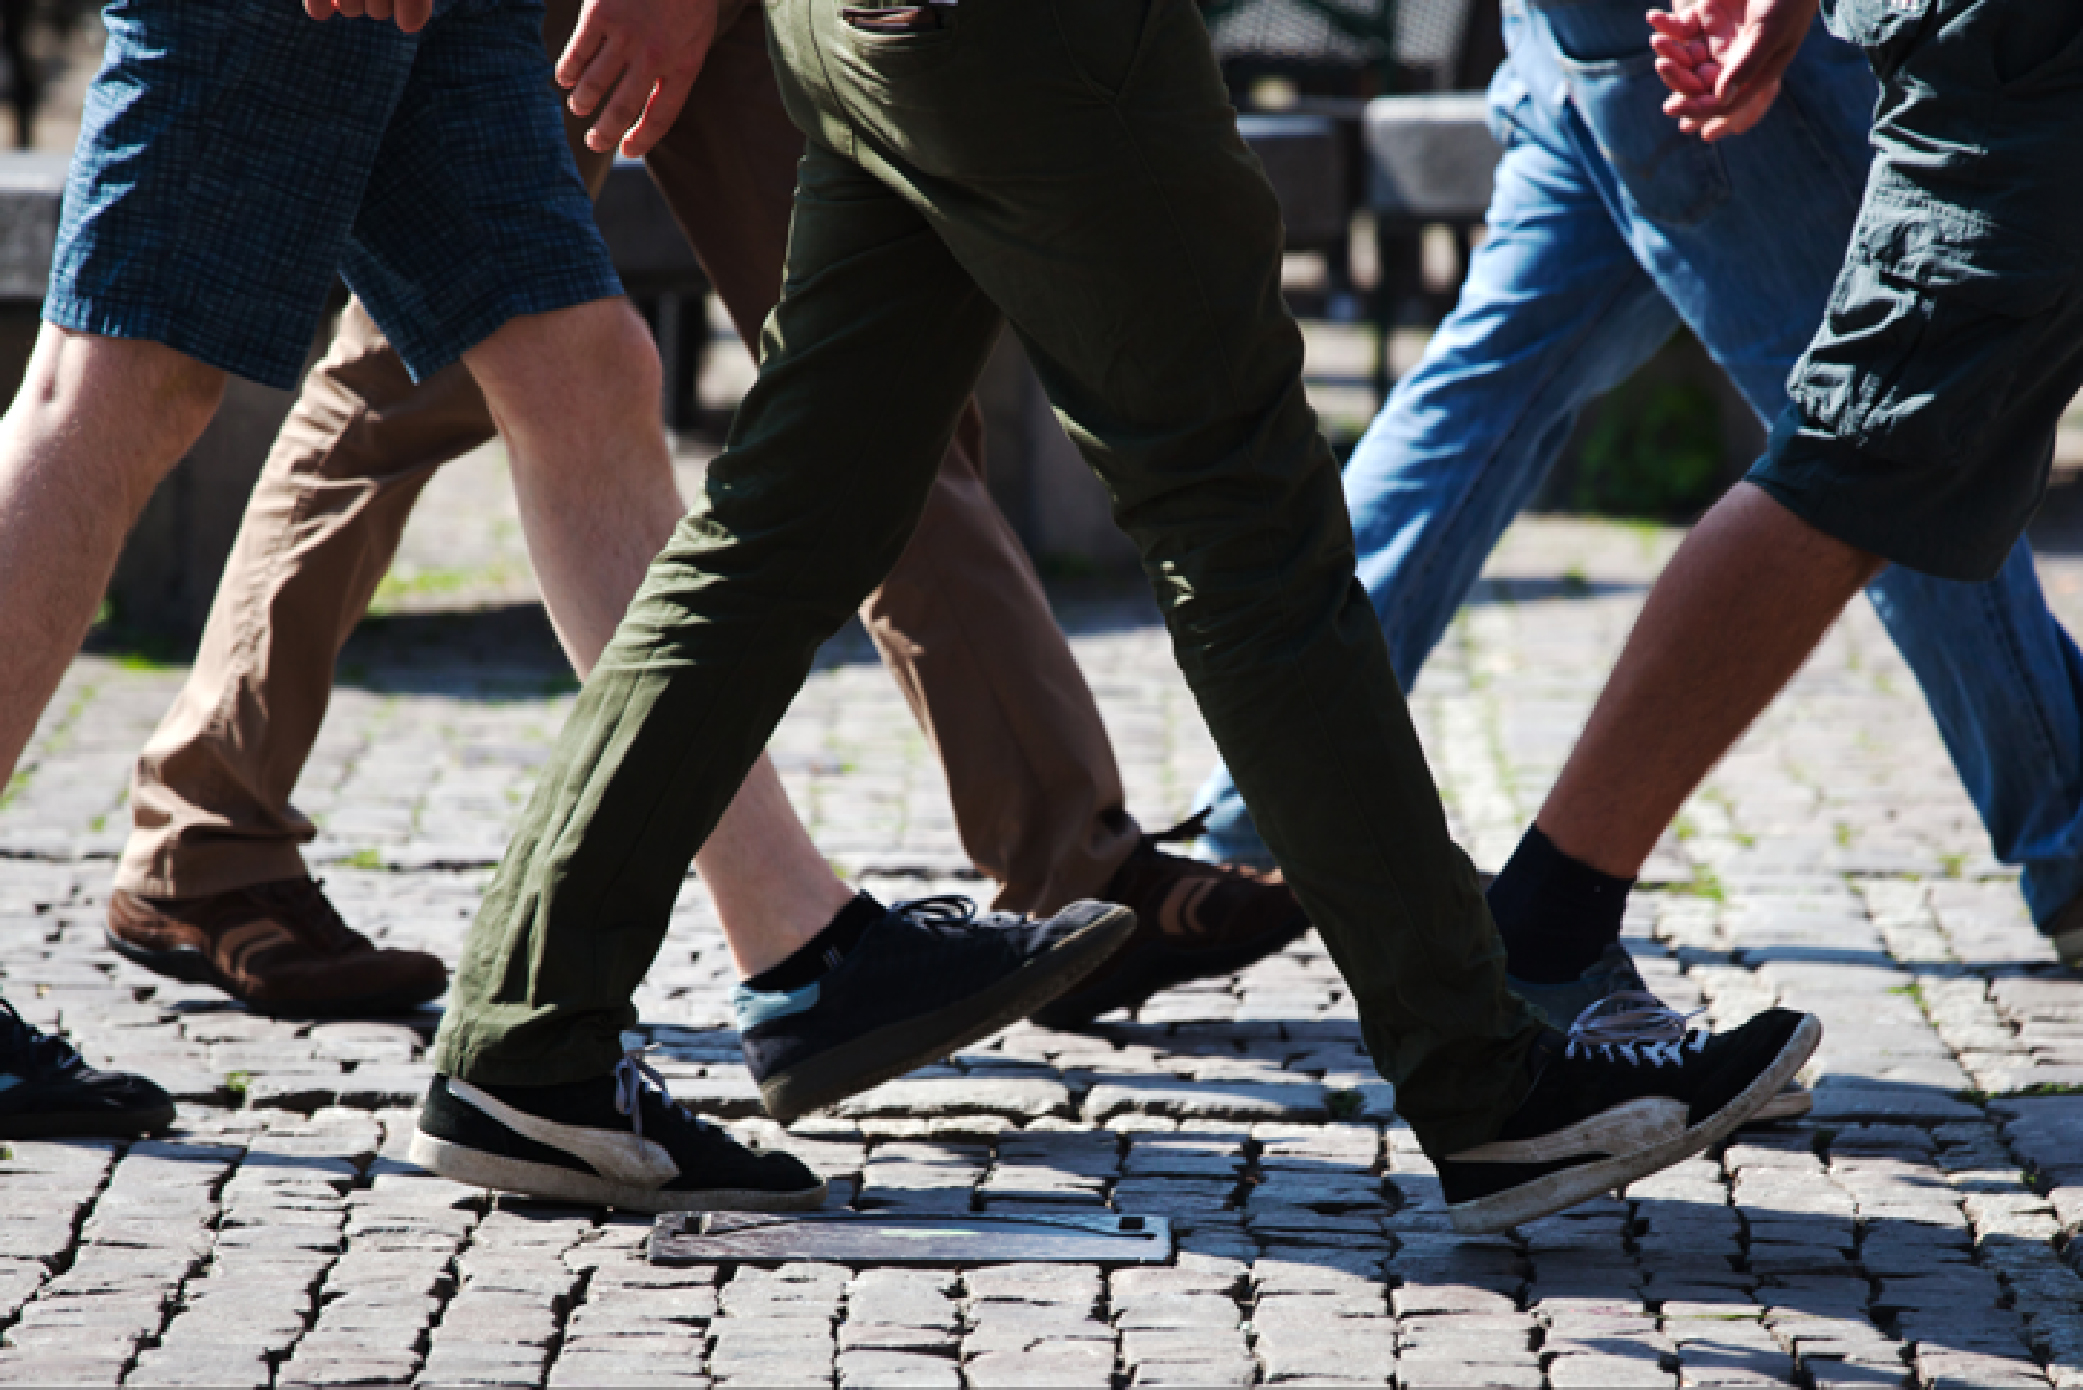 Photo of people's legs walking on a path